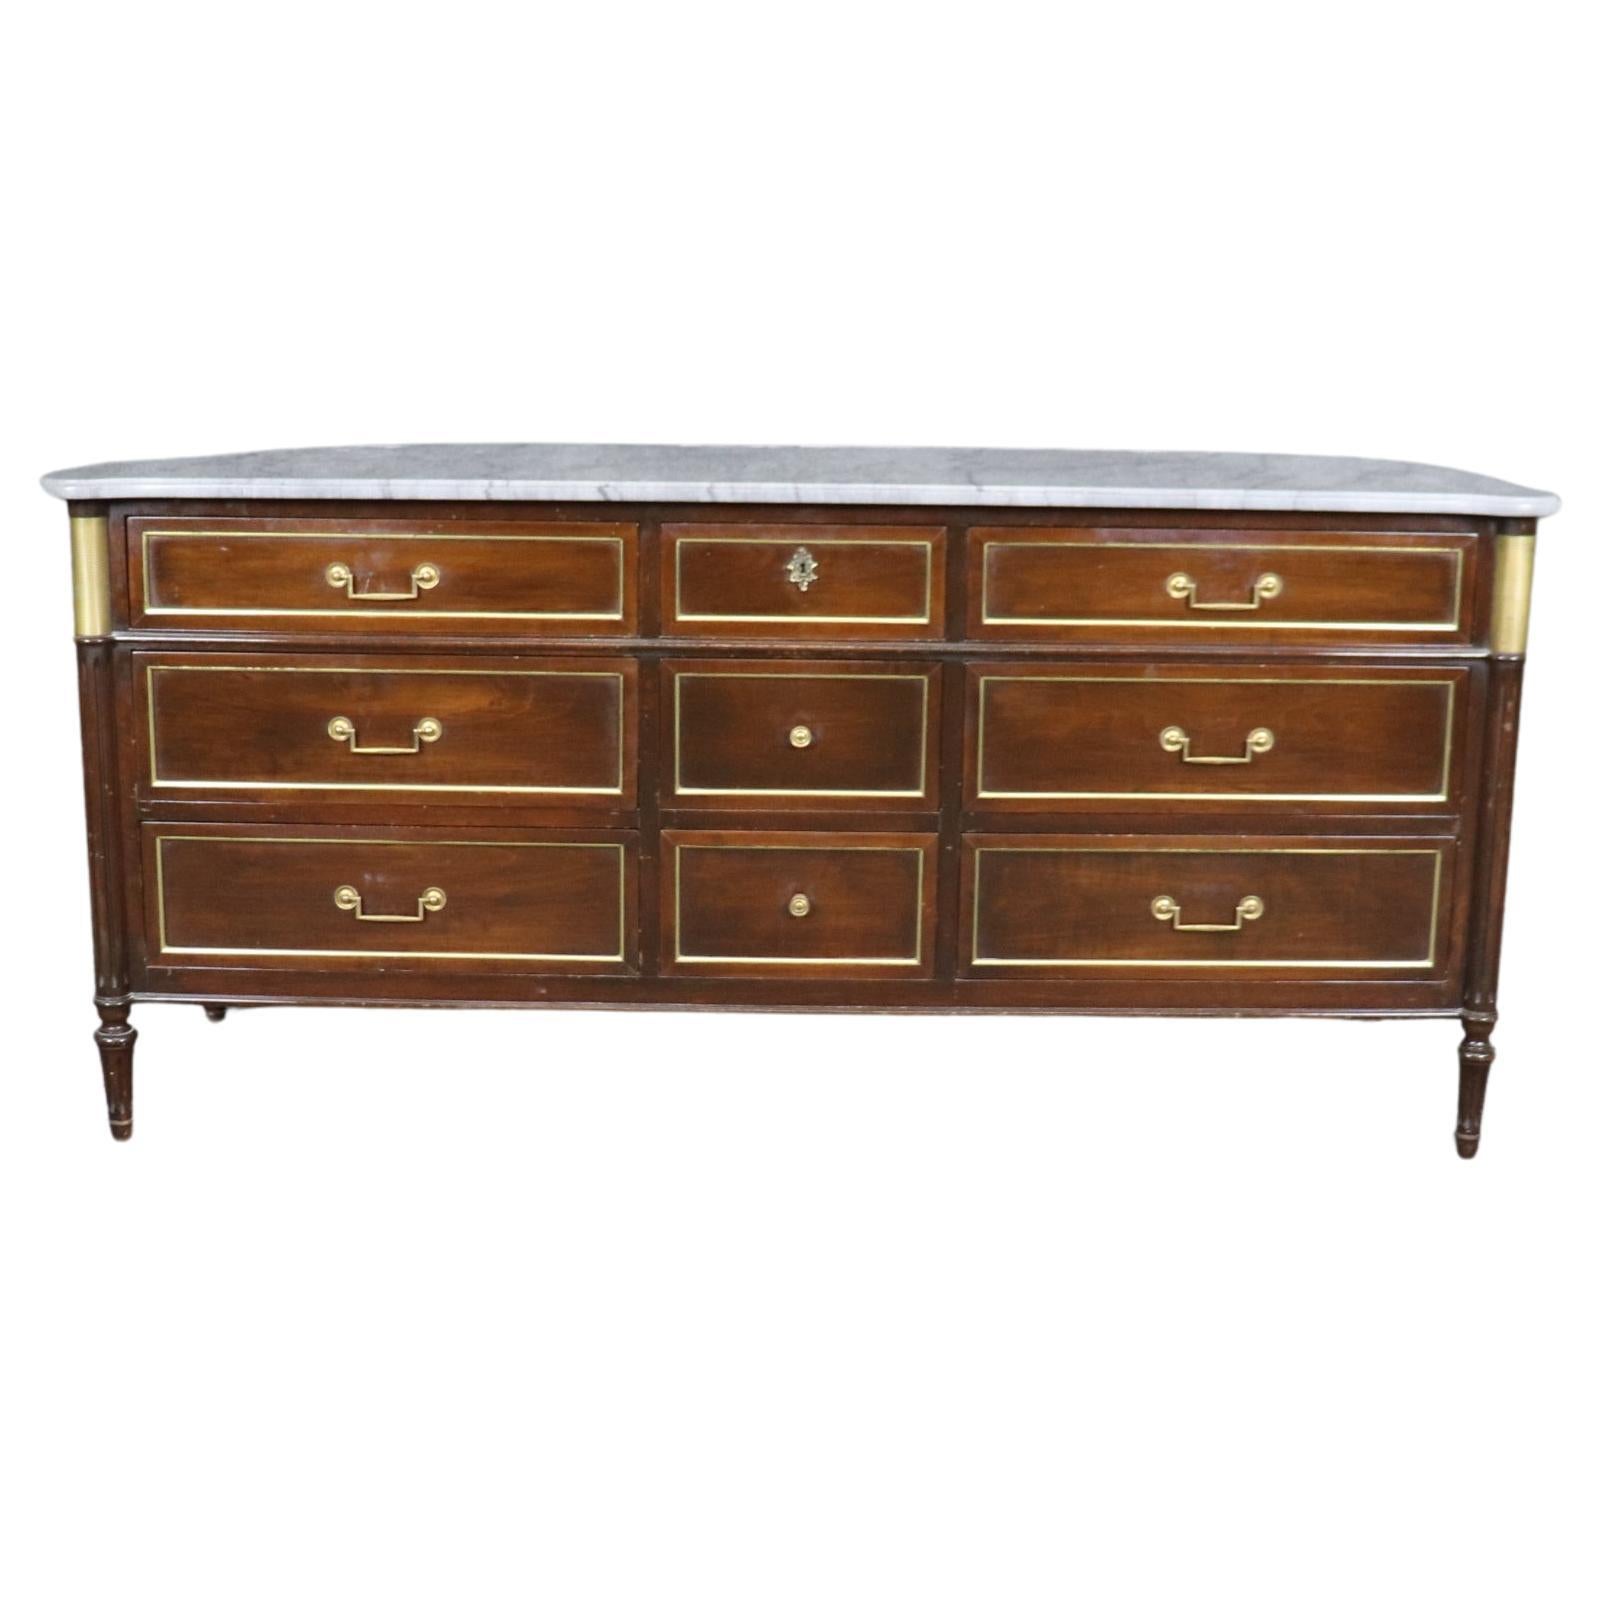 Maison Jansen Style Mahogany with Brass and Bronze Ormolu Triple Dresser For Sale